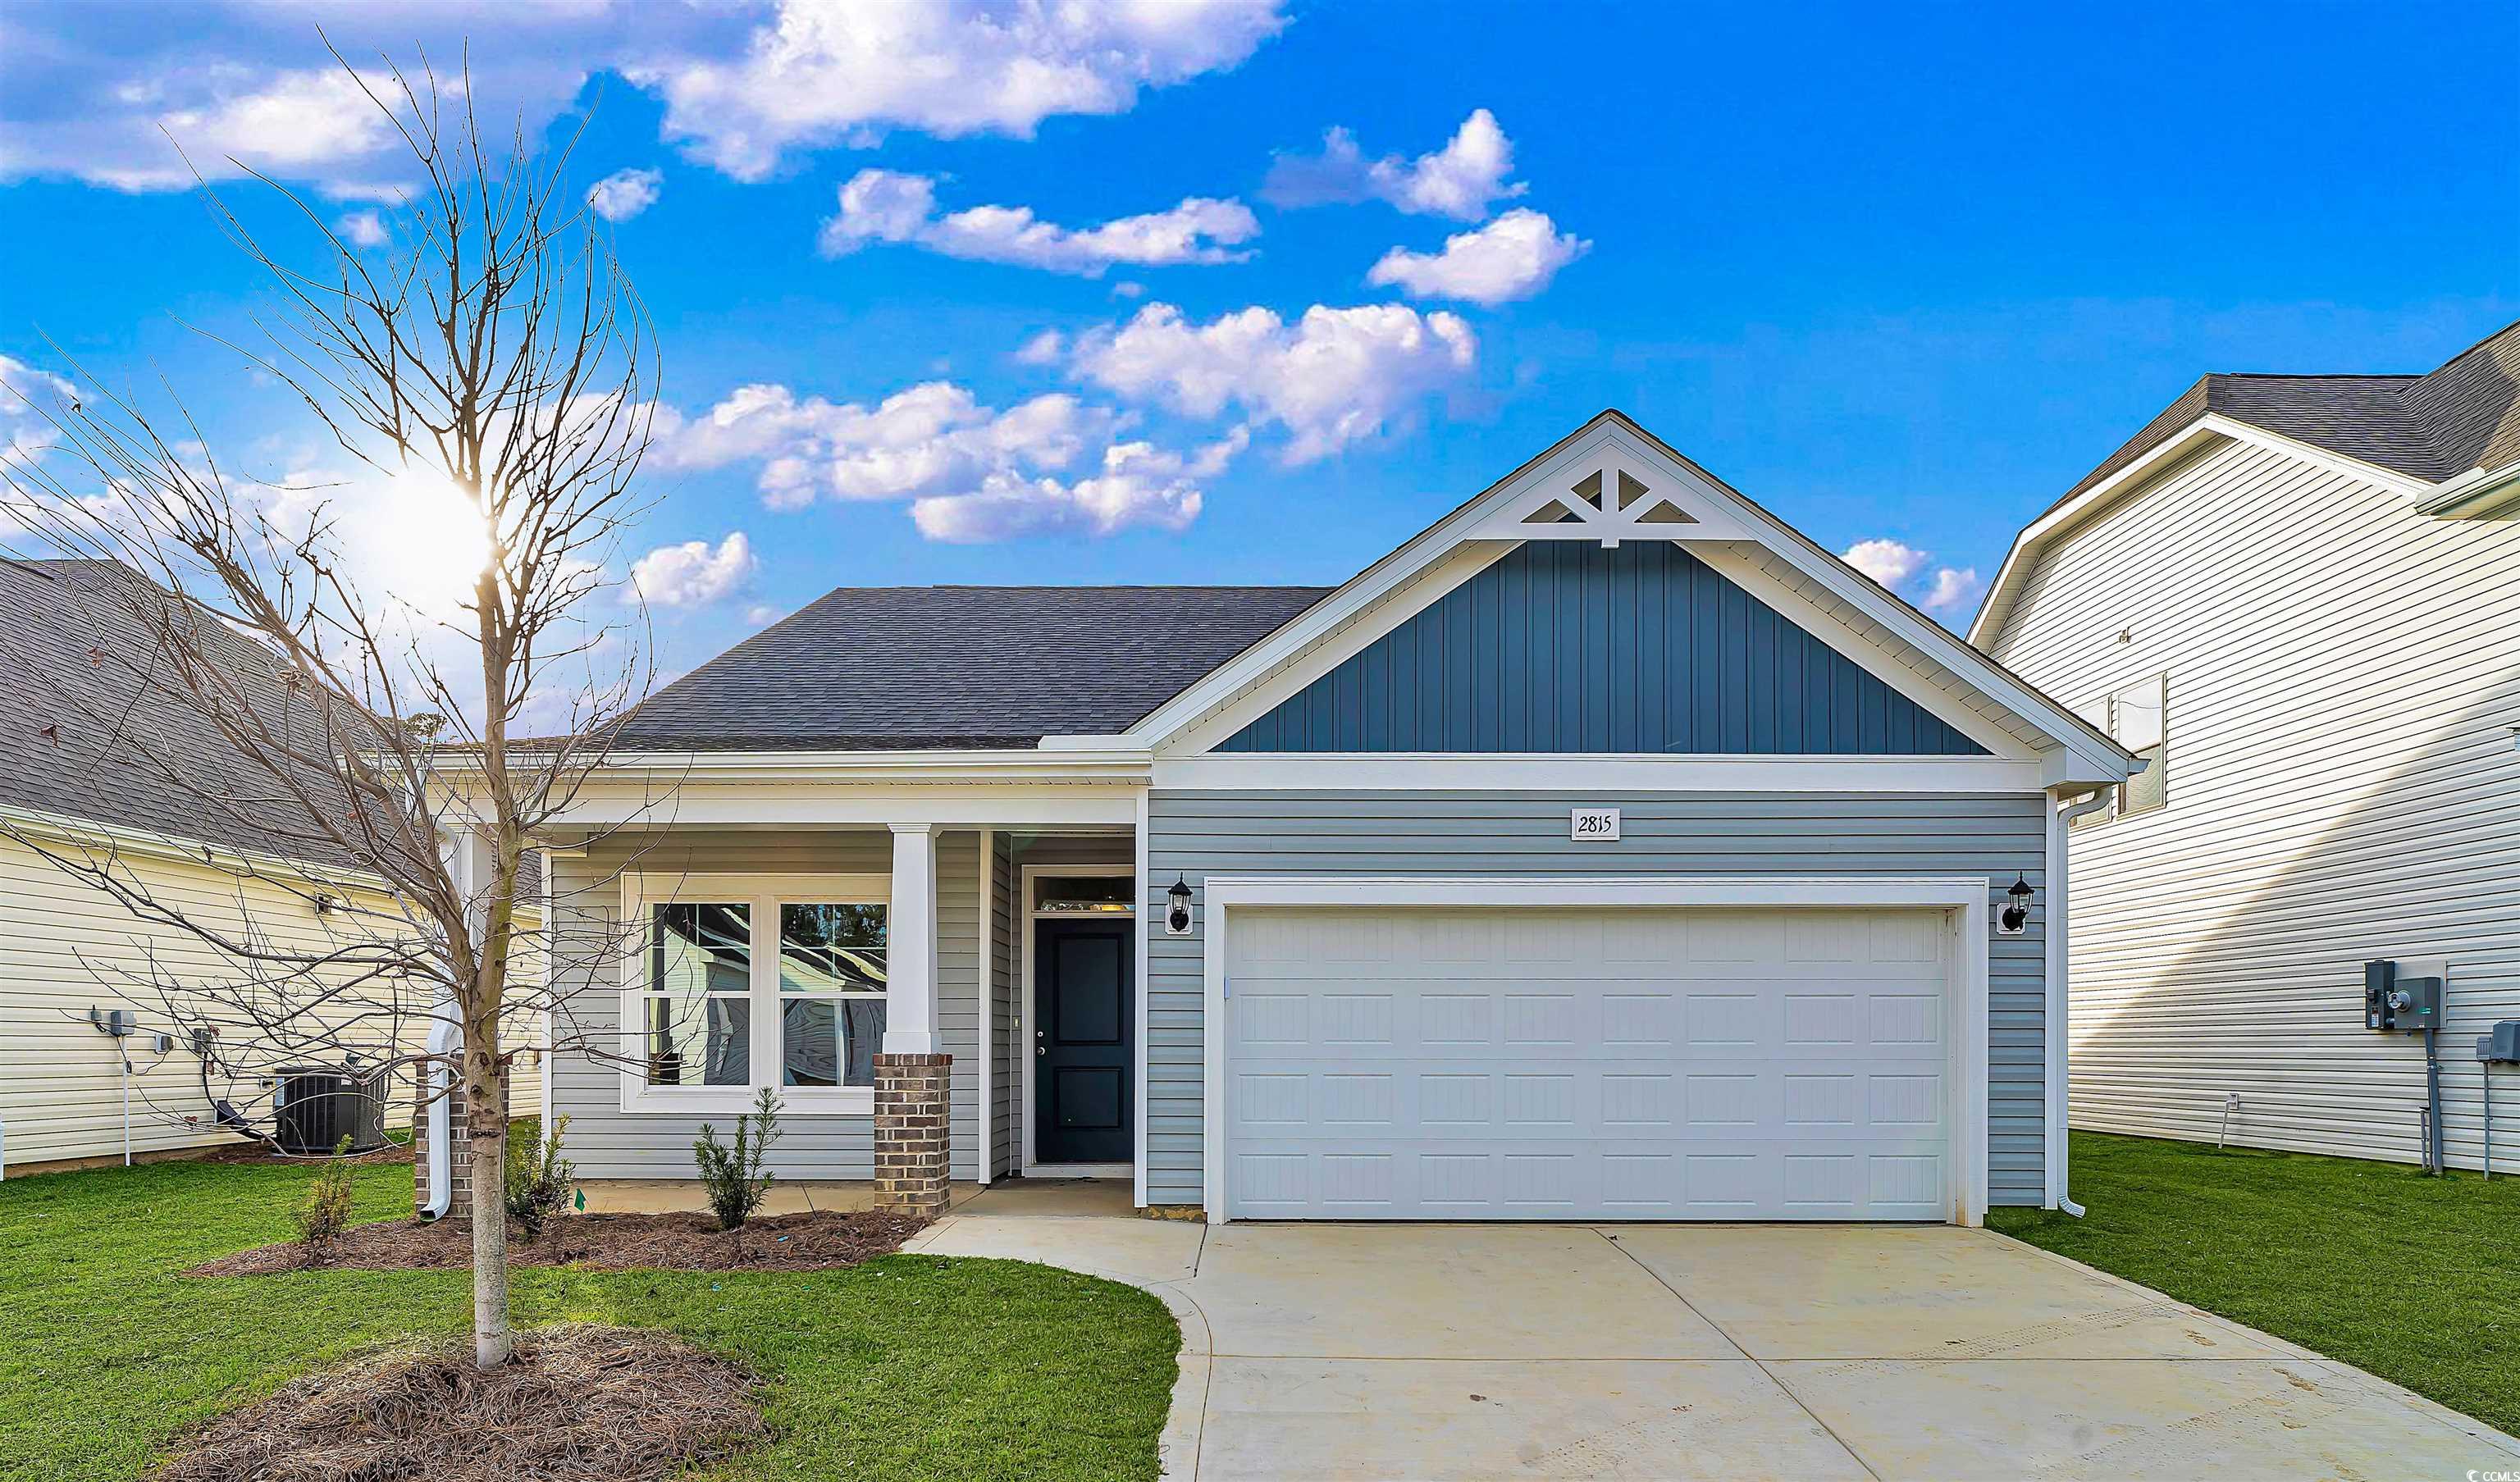 **march madness incentives** your choice of savings! call for details.  this home is move in ready. the cascade plan is a single level home with 3 bedrooms, 2 full bathrooms, 2 car garage, and is 1,604 heated sq. ft. relax on your front covered porch as neighbors stroll by on the sidewalks in this quaint community. this open concept home plan is great for entertaining or hanging out with friends and family. a bedroom is located to the left of the foyer followed by a full bath and 3rd bedroom. the kitchen with white staggered cabinets with crown molding and hardware, also features an accent island, in admiral blue, with a flush overhang. the kitchen countertops are a level 3 quartz! the casual dining area that opens up to the spacious great room with access to the rear covered porch. the spacious primary suite is located in the back of the home and features a large walk-in closet and primary bath with split vanities. this home will have full sod and irrigation! (home and community information, including pricing, incentive discounts, included features, terms, availability and amenities, are subject to change prior to sale at any time without notice or obligation. square footages are approximate. pictures, photographs, colors, features, and sizes are for illustration purposes only and will vary from the homes as built. equal housing opportunity builder.) photos are of a similar cascade home.